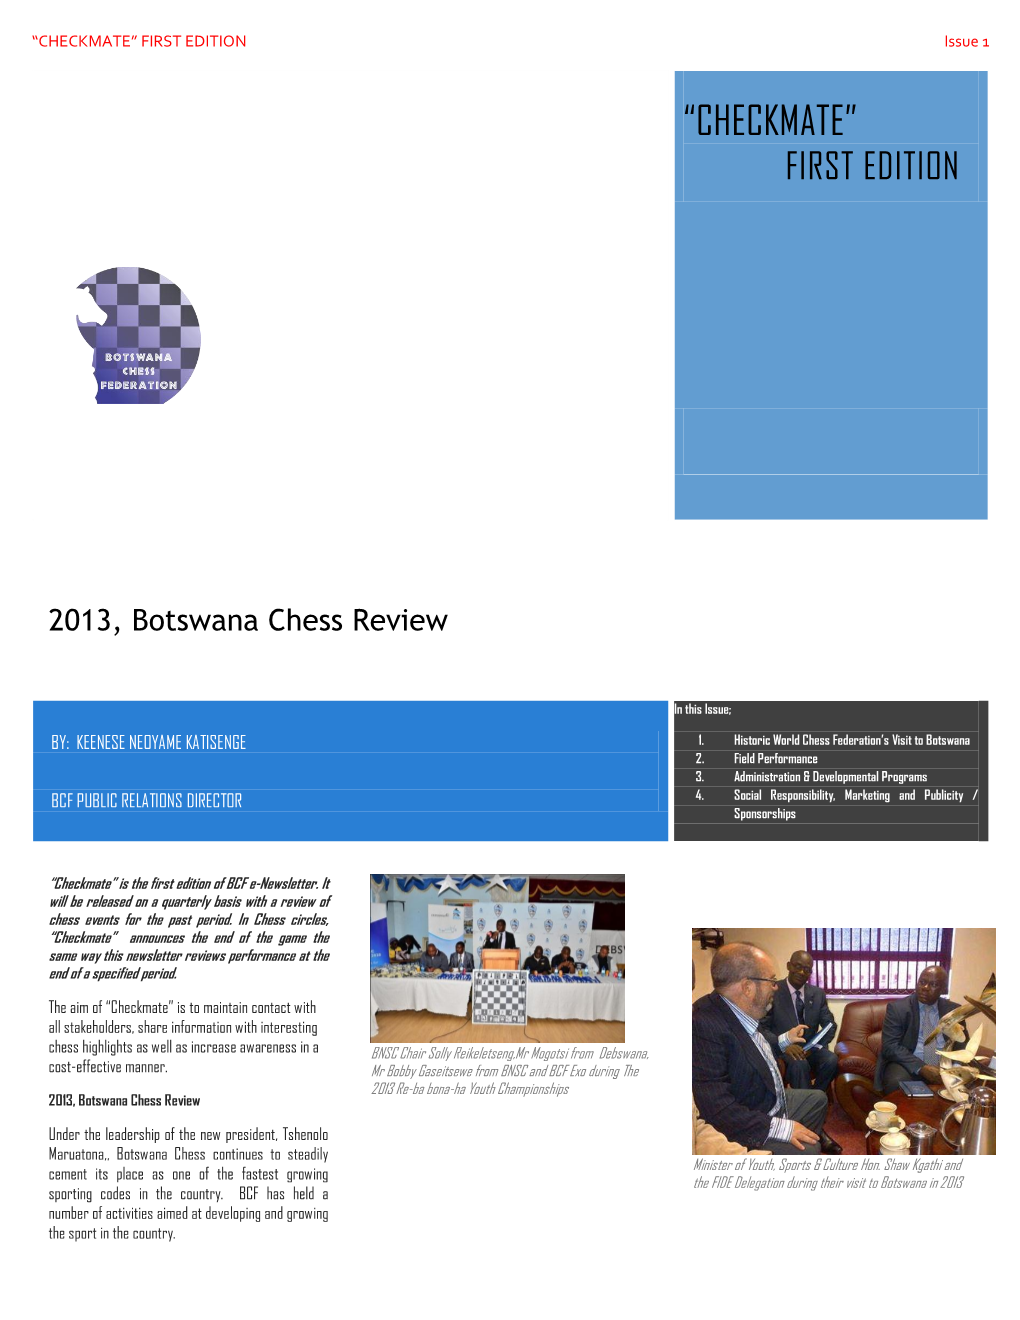 “CHECKMATE” FIRST EDITION Issue 1